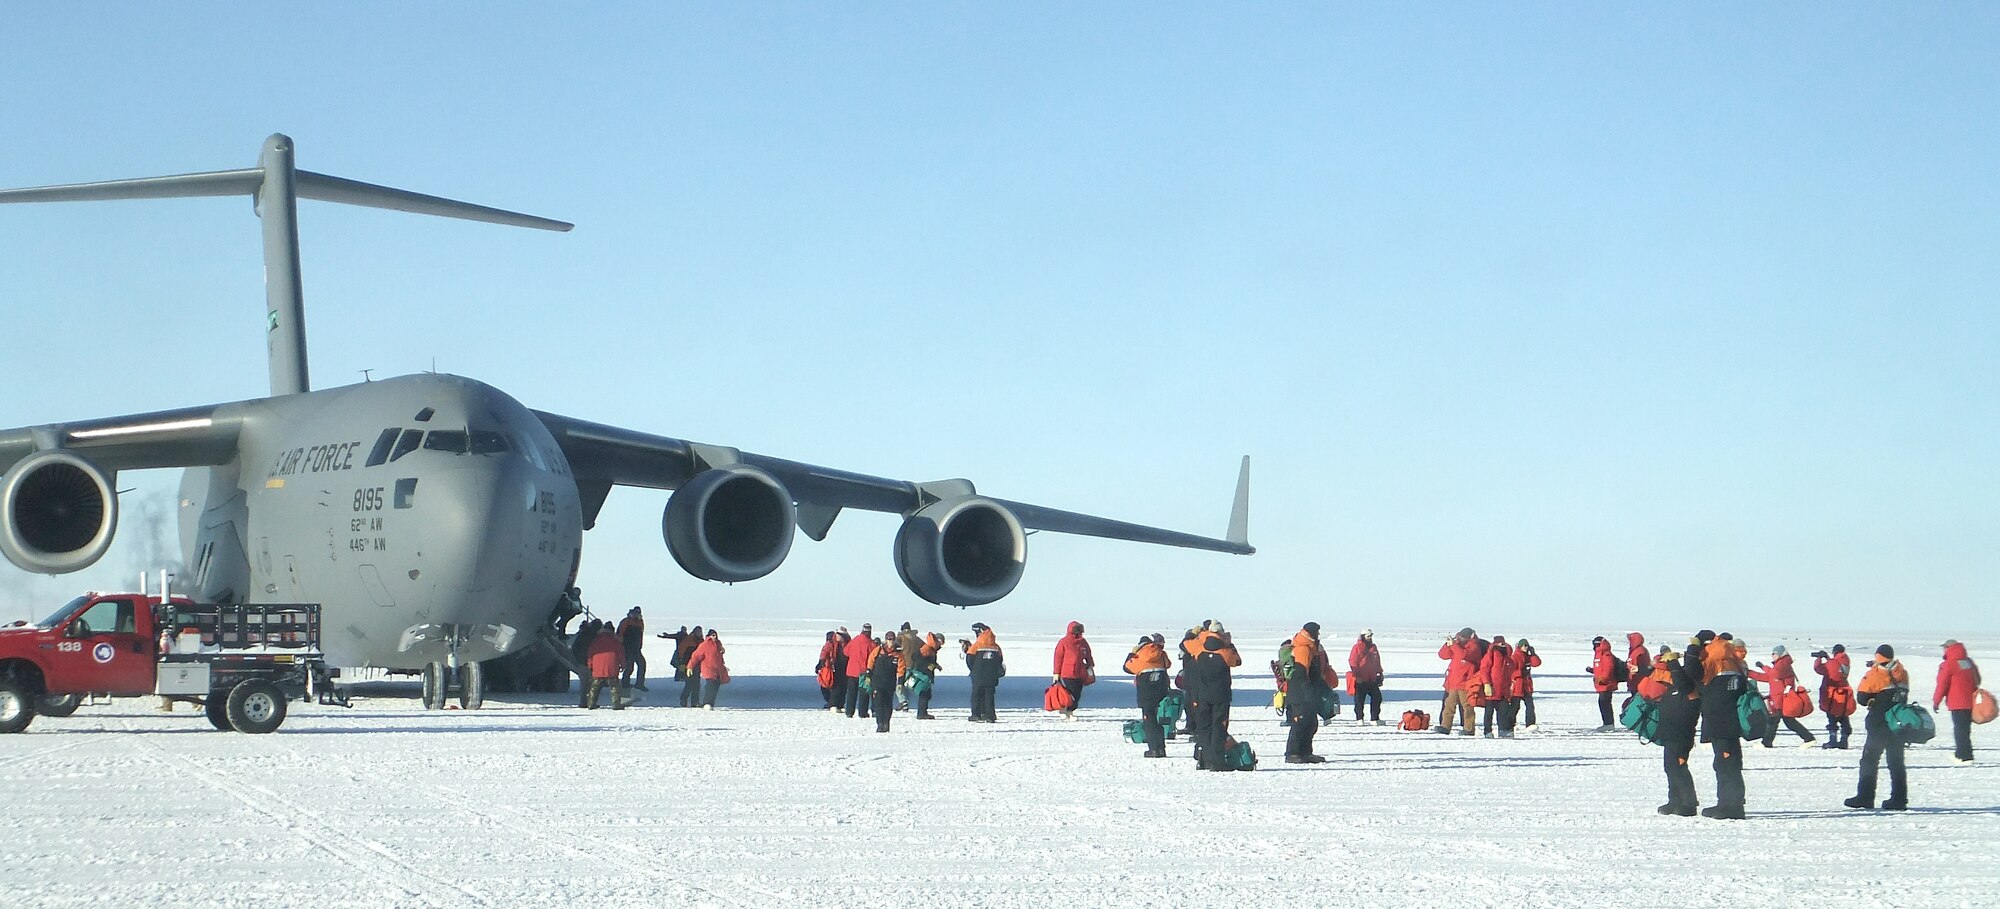 Passengers disembark from an Air Force C-17 Globemaster III at the Annual Sea Ice Runway near McMurdo Station, Antarctica. The C-17 is operated by the men and women of 446th and 62nd Airlift Wings, Joint Base Lewis-McChord, Wash. The first main body flights of the 2011-2012 austral summer season arrived at McMurdo on Oct. 4, 2011. (National Science Foundation photo by Jean Varner)